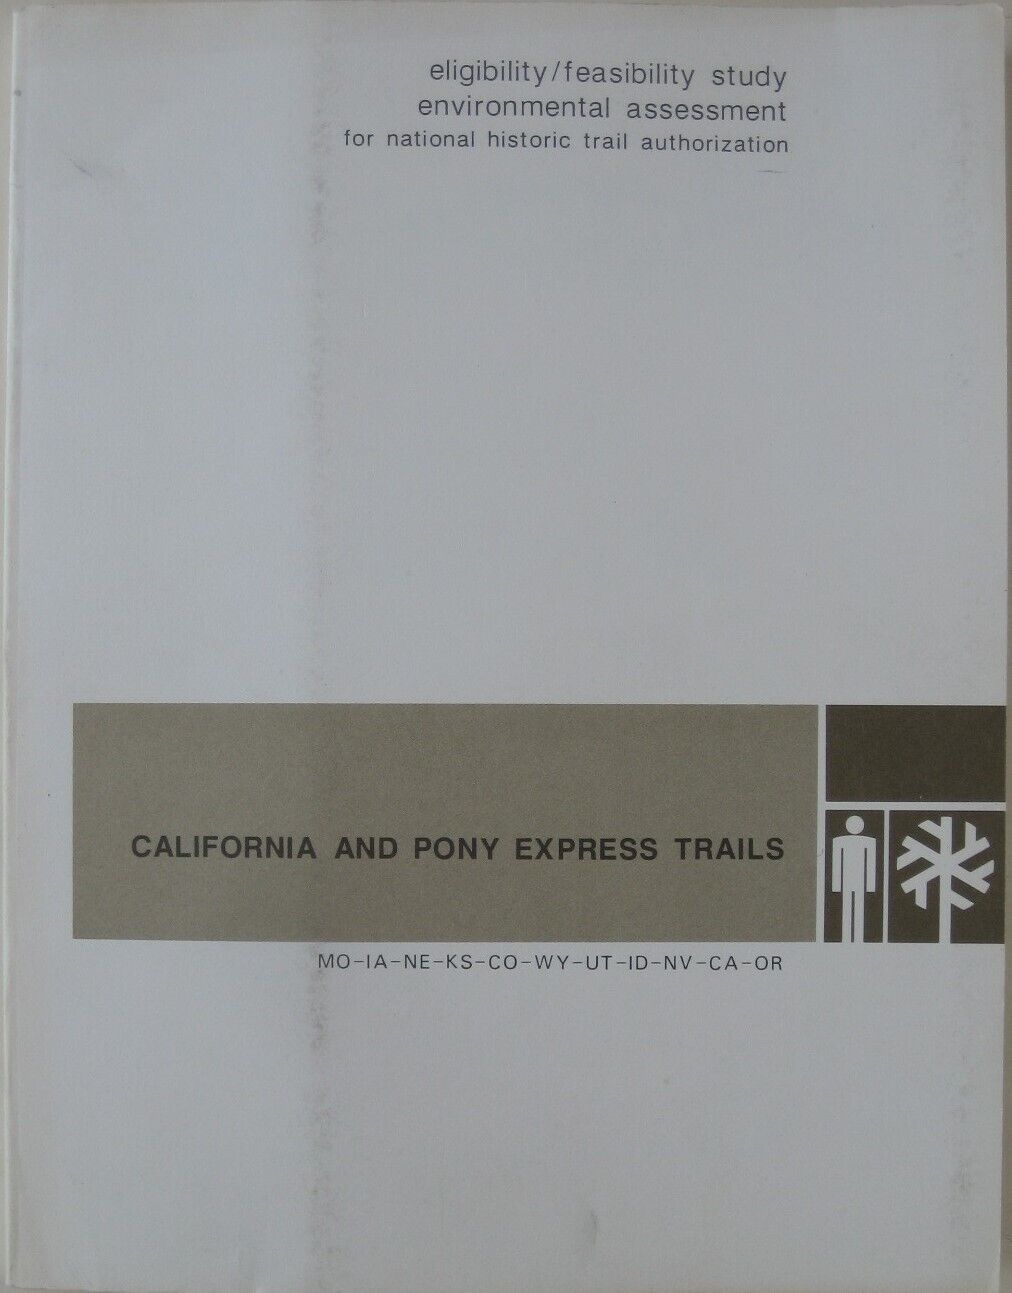 Official 1987 CALIFORNIA & PONY EXPRESS TRAILS National Park Service Study Maps